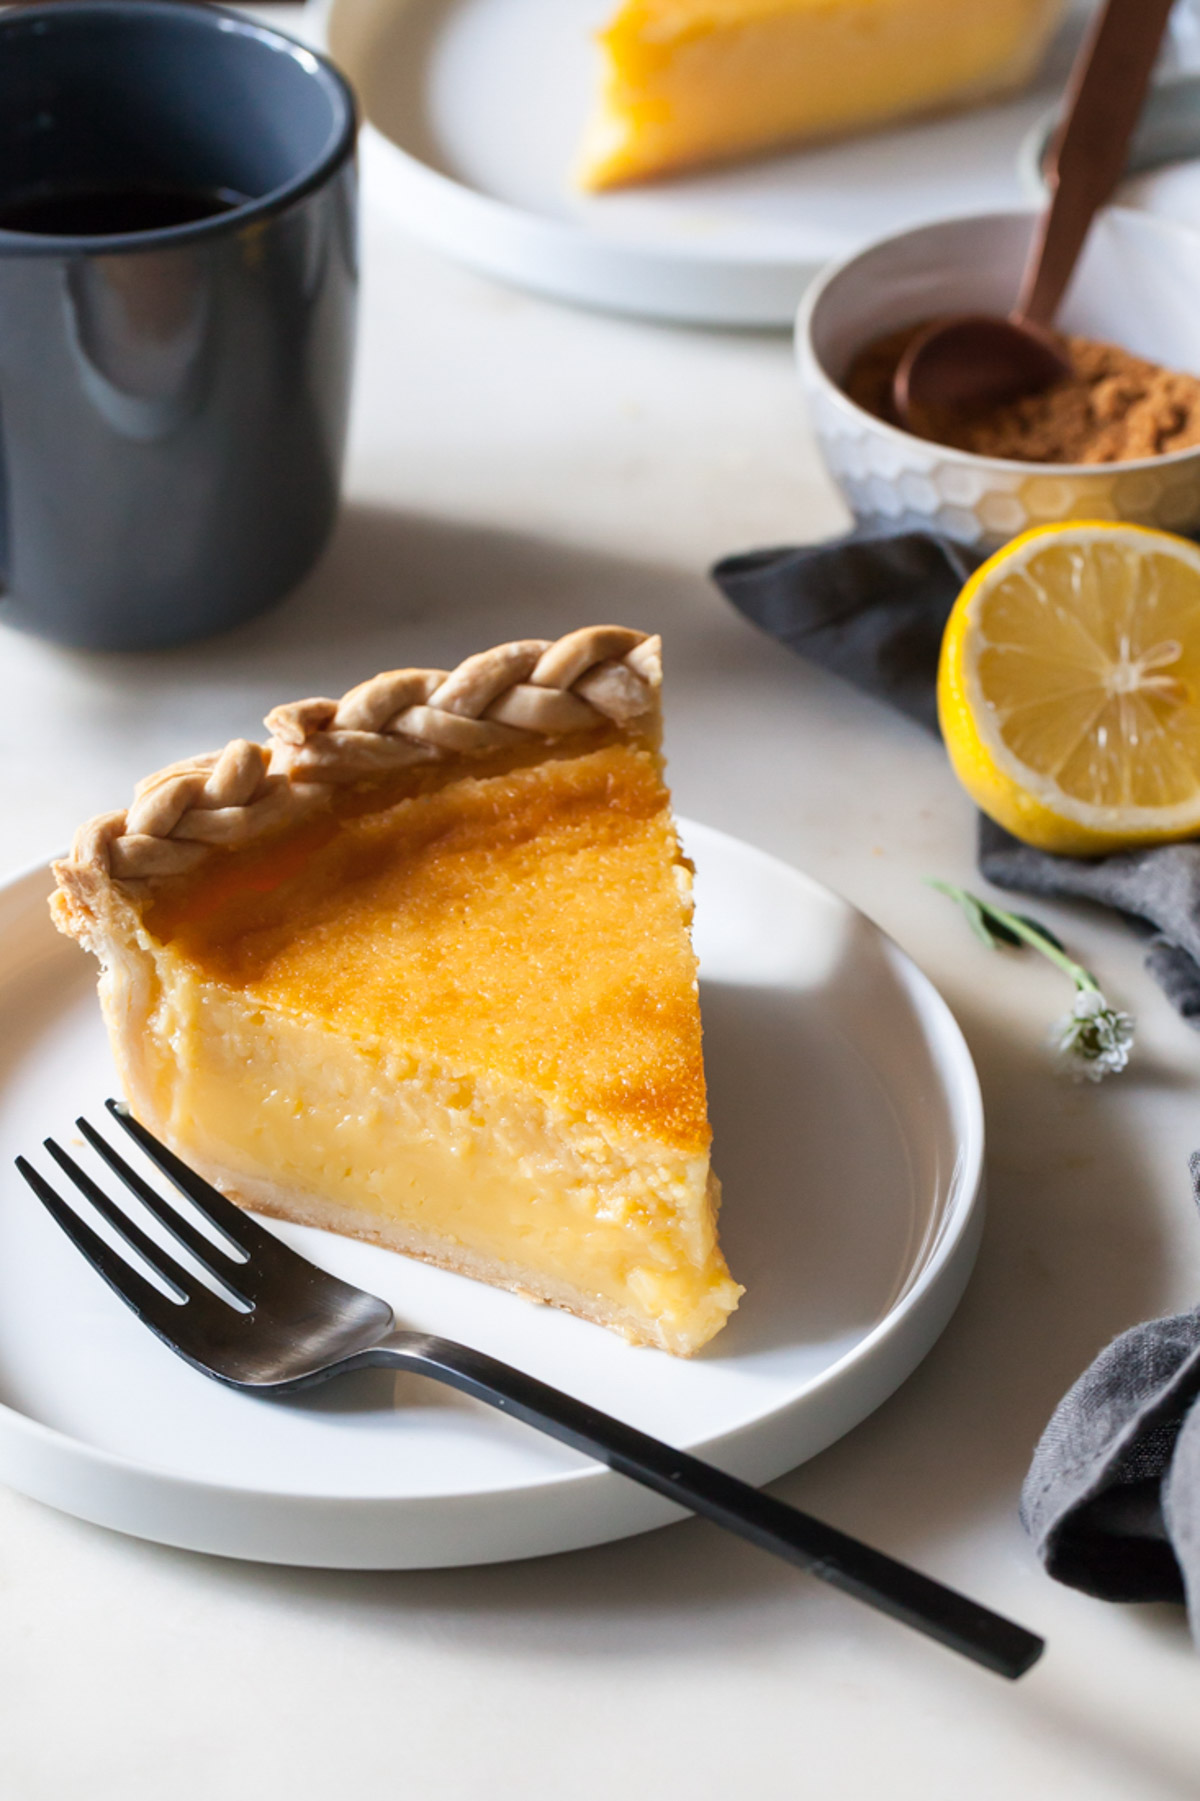 A think slice of lemon chess pie on a plate